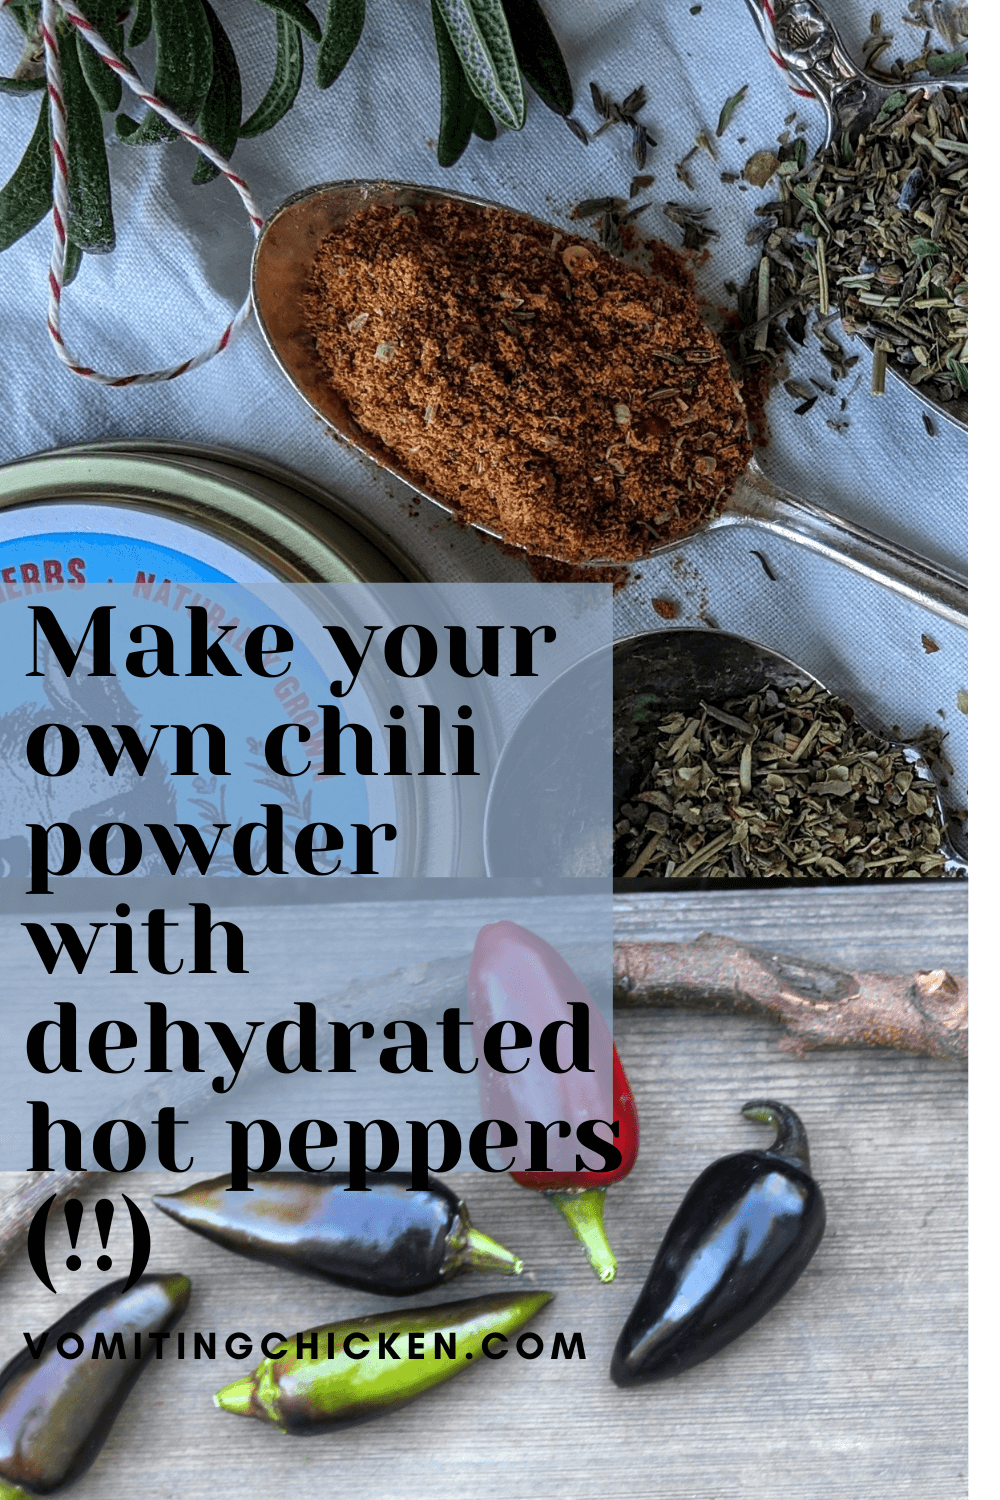 https://vomitingchicken.com/wp-content/uploads/Make-your-own-chili-powder-with-dehydrated-hot-peppers-.png